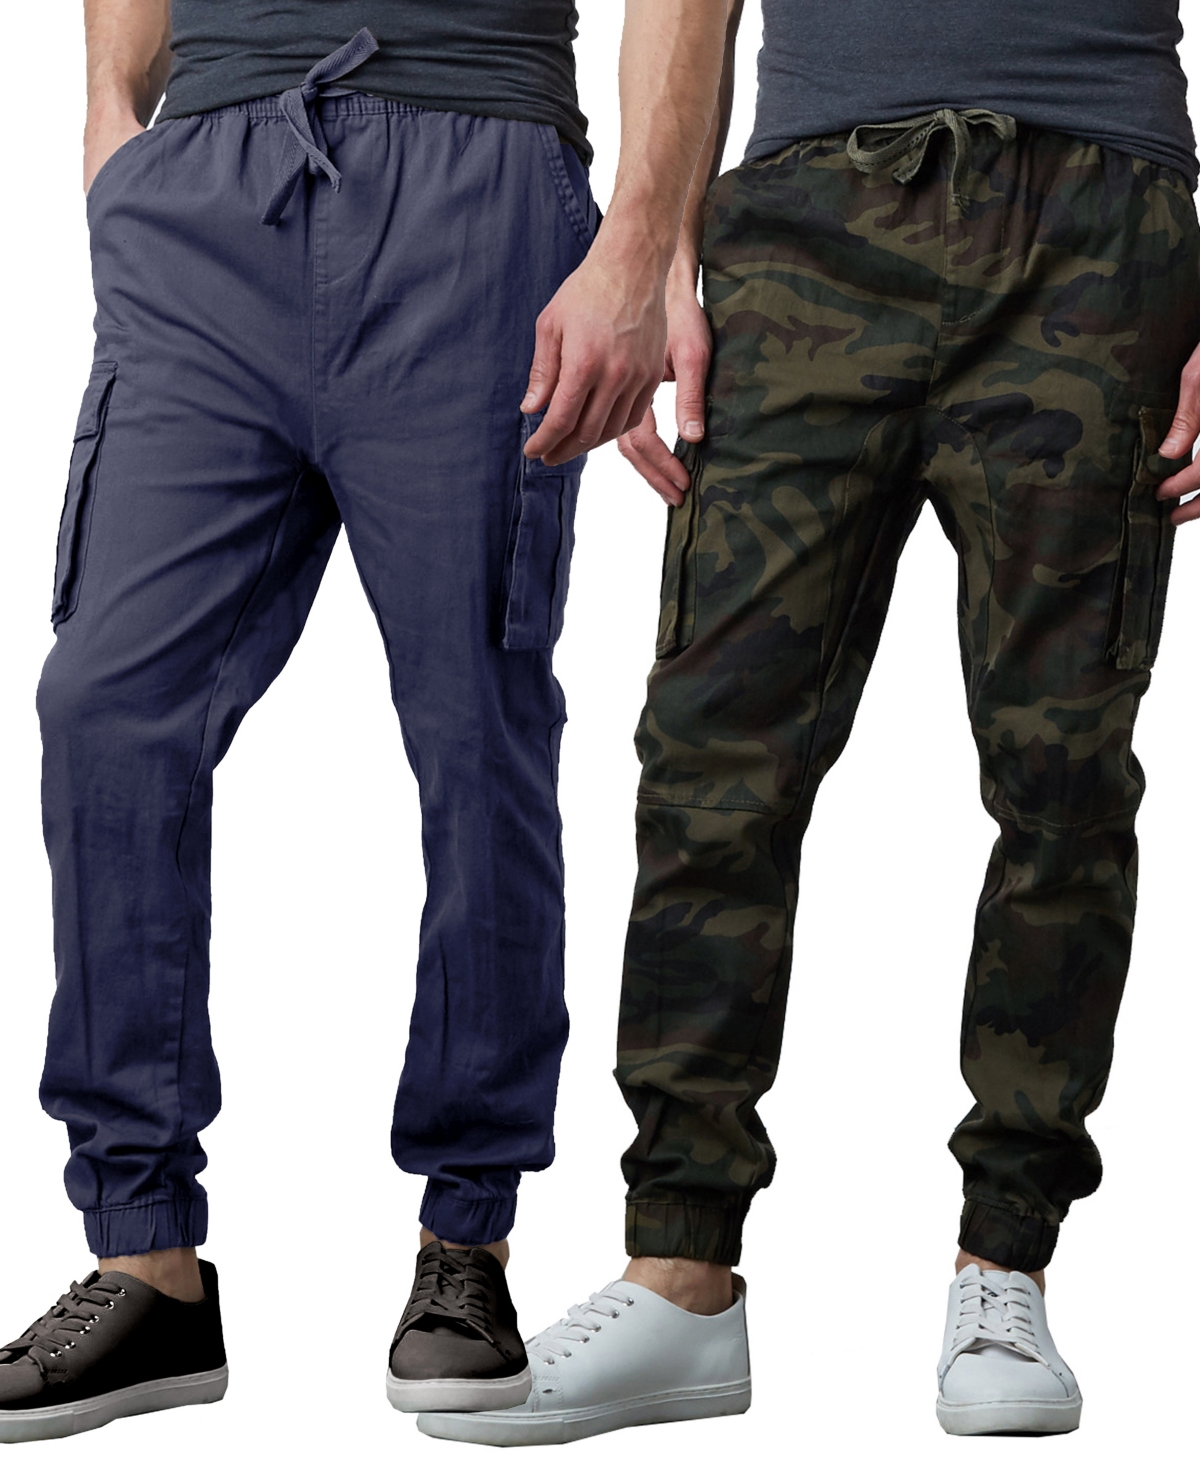 Men's Slim Fit Stretch Cargo Jogger Pants, Pack of 2 - Navy, Woodland